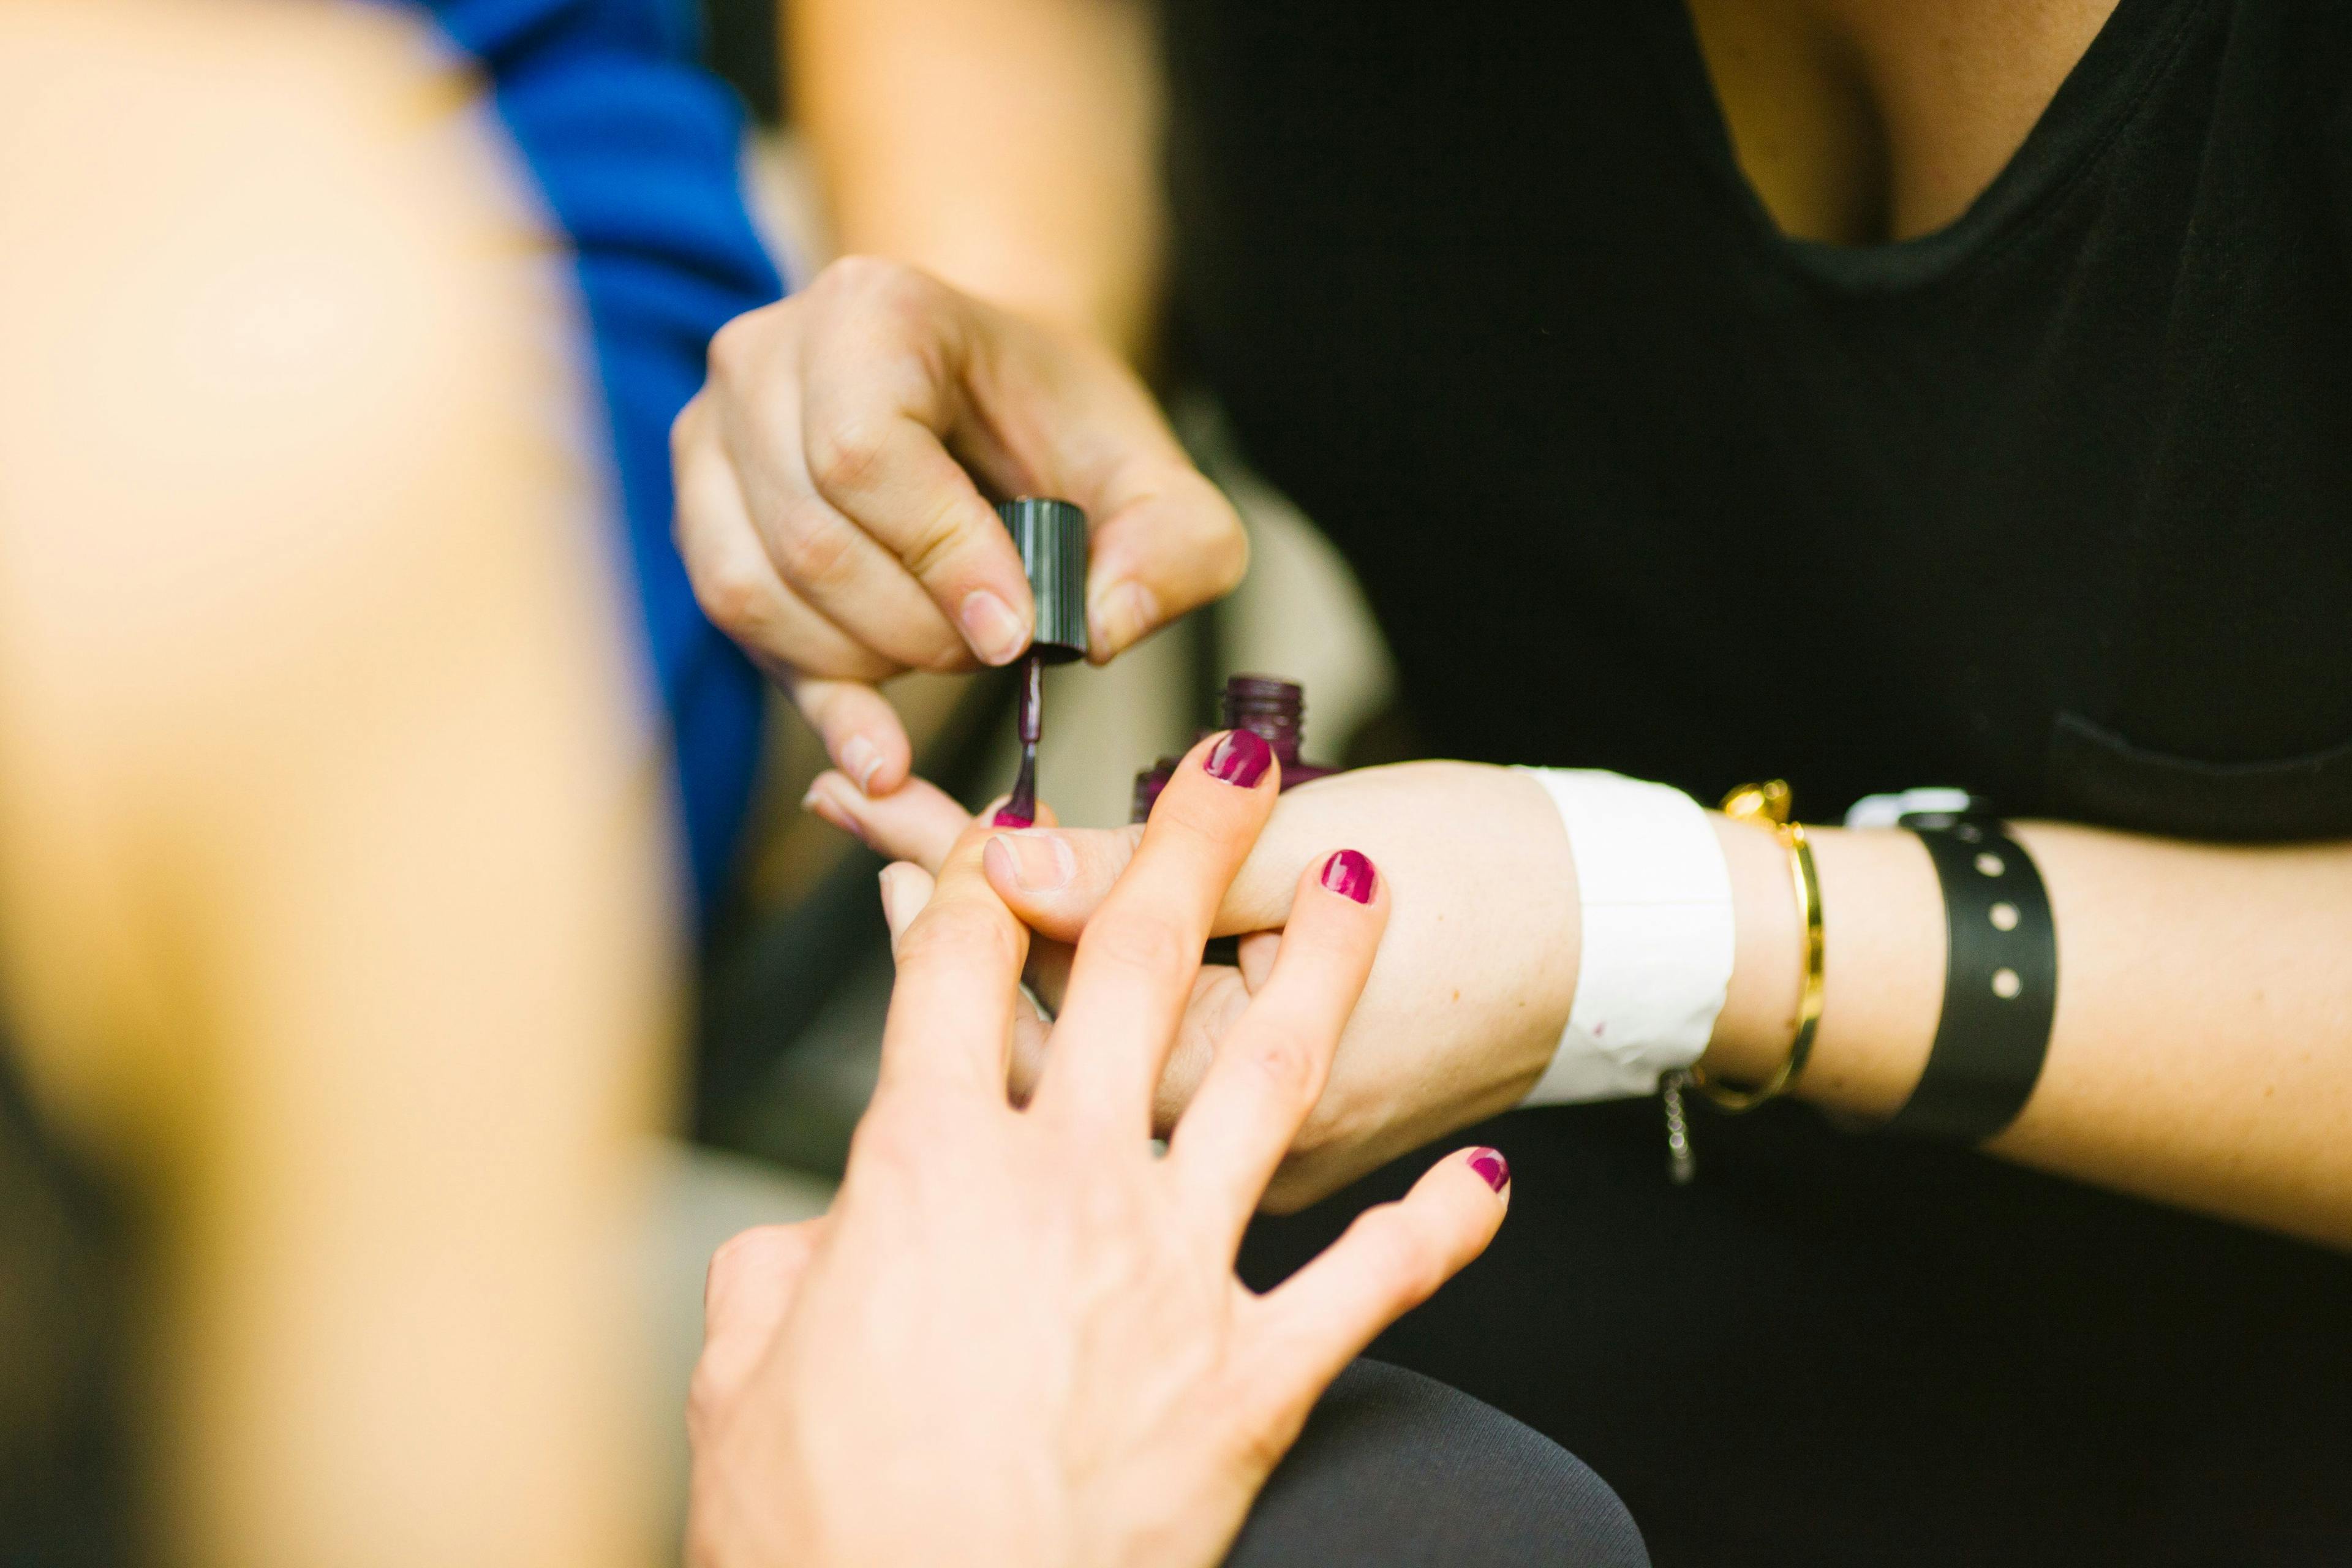 Could Your UV Manicure Increase Your Risk for Skin Cancer?